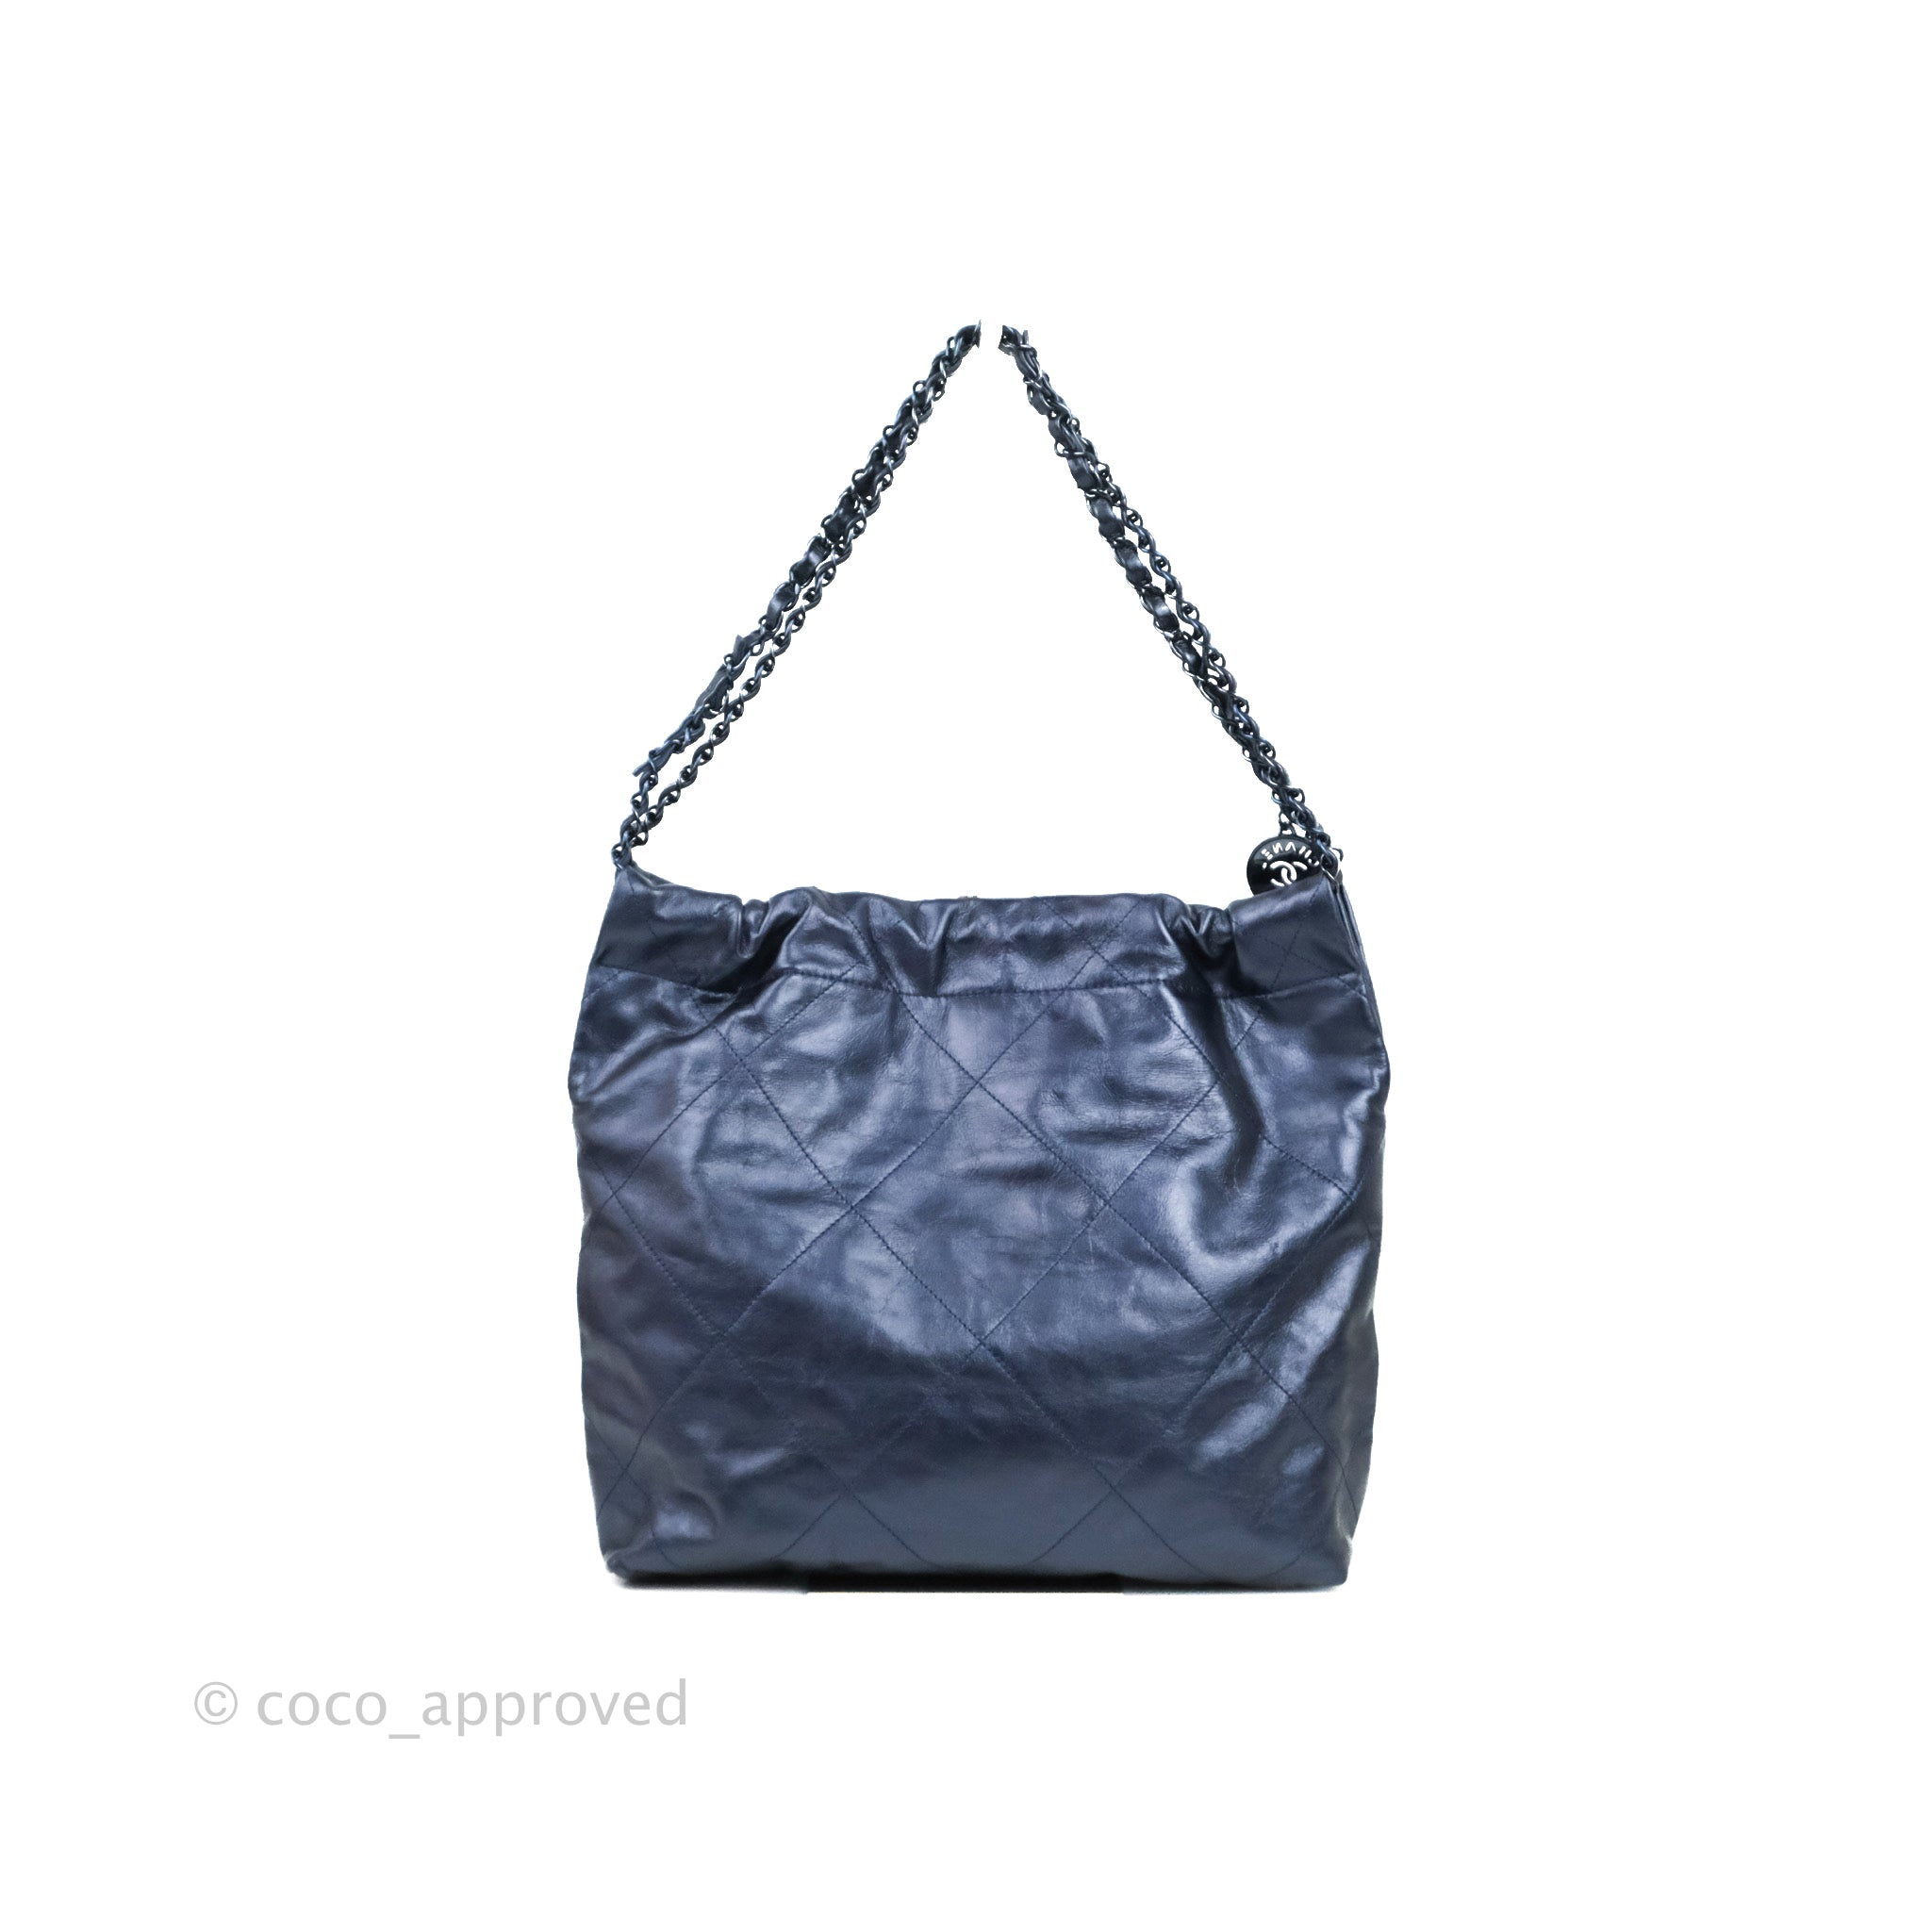 Chanel 22 Small Metallic Midnight Blue Aged Calfskin Midnight Blue/Sil –  Coco Approved Studio